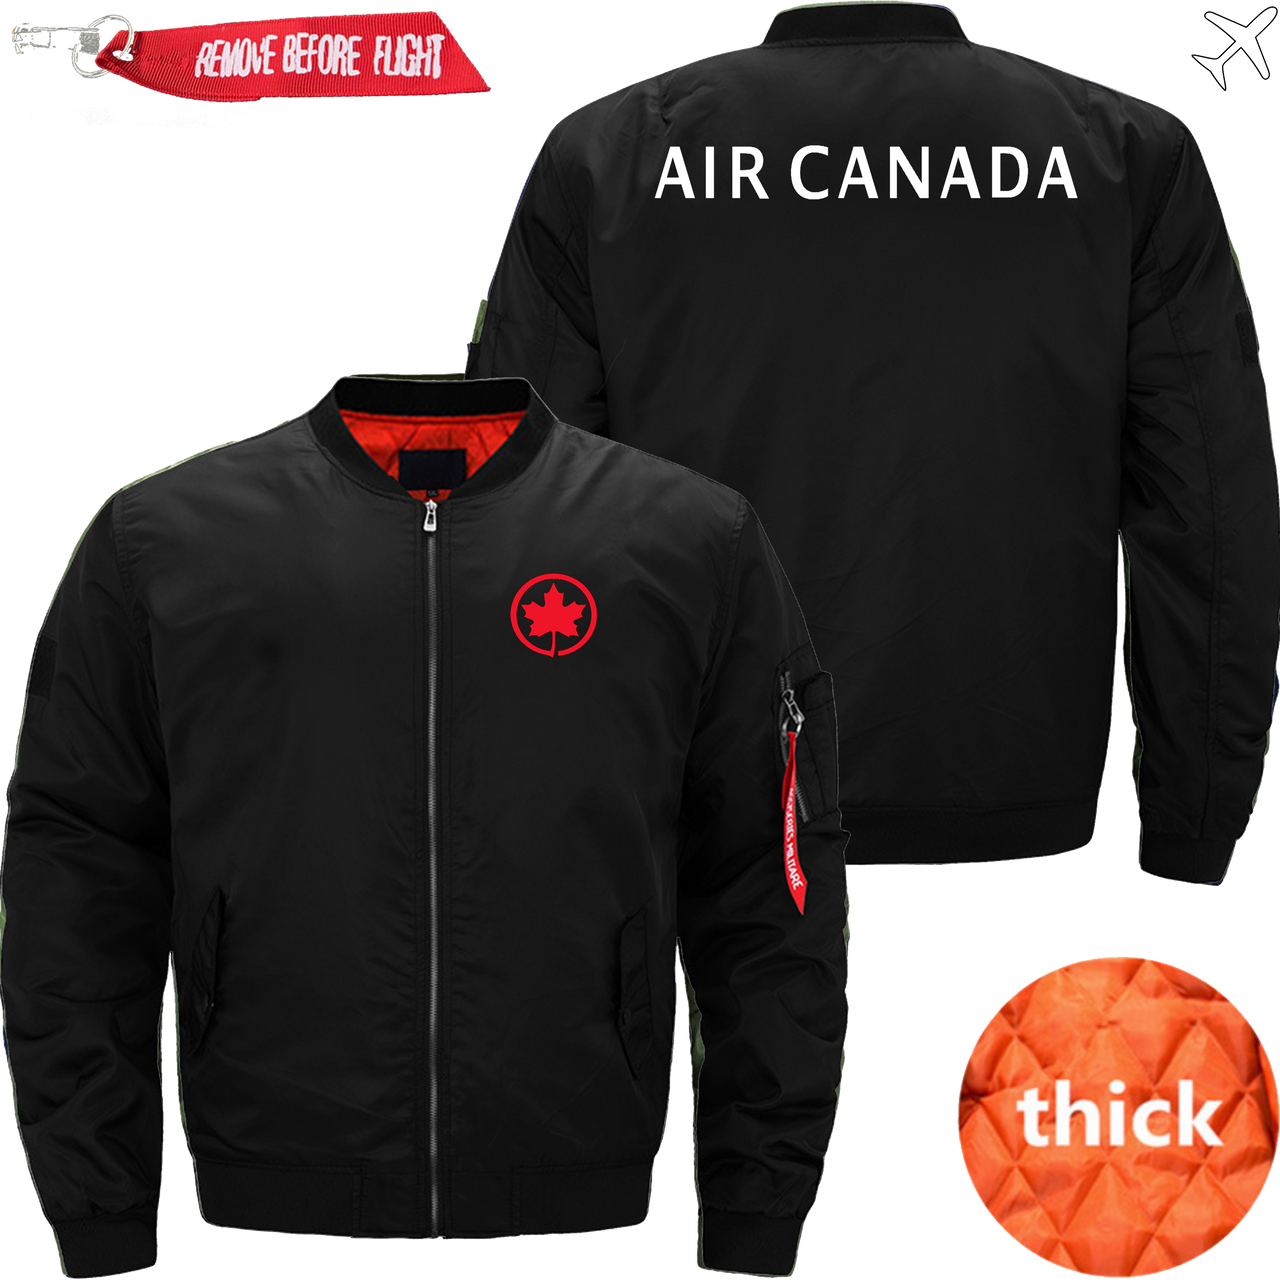 CANADA AIRLINE JACKET